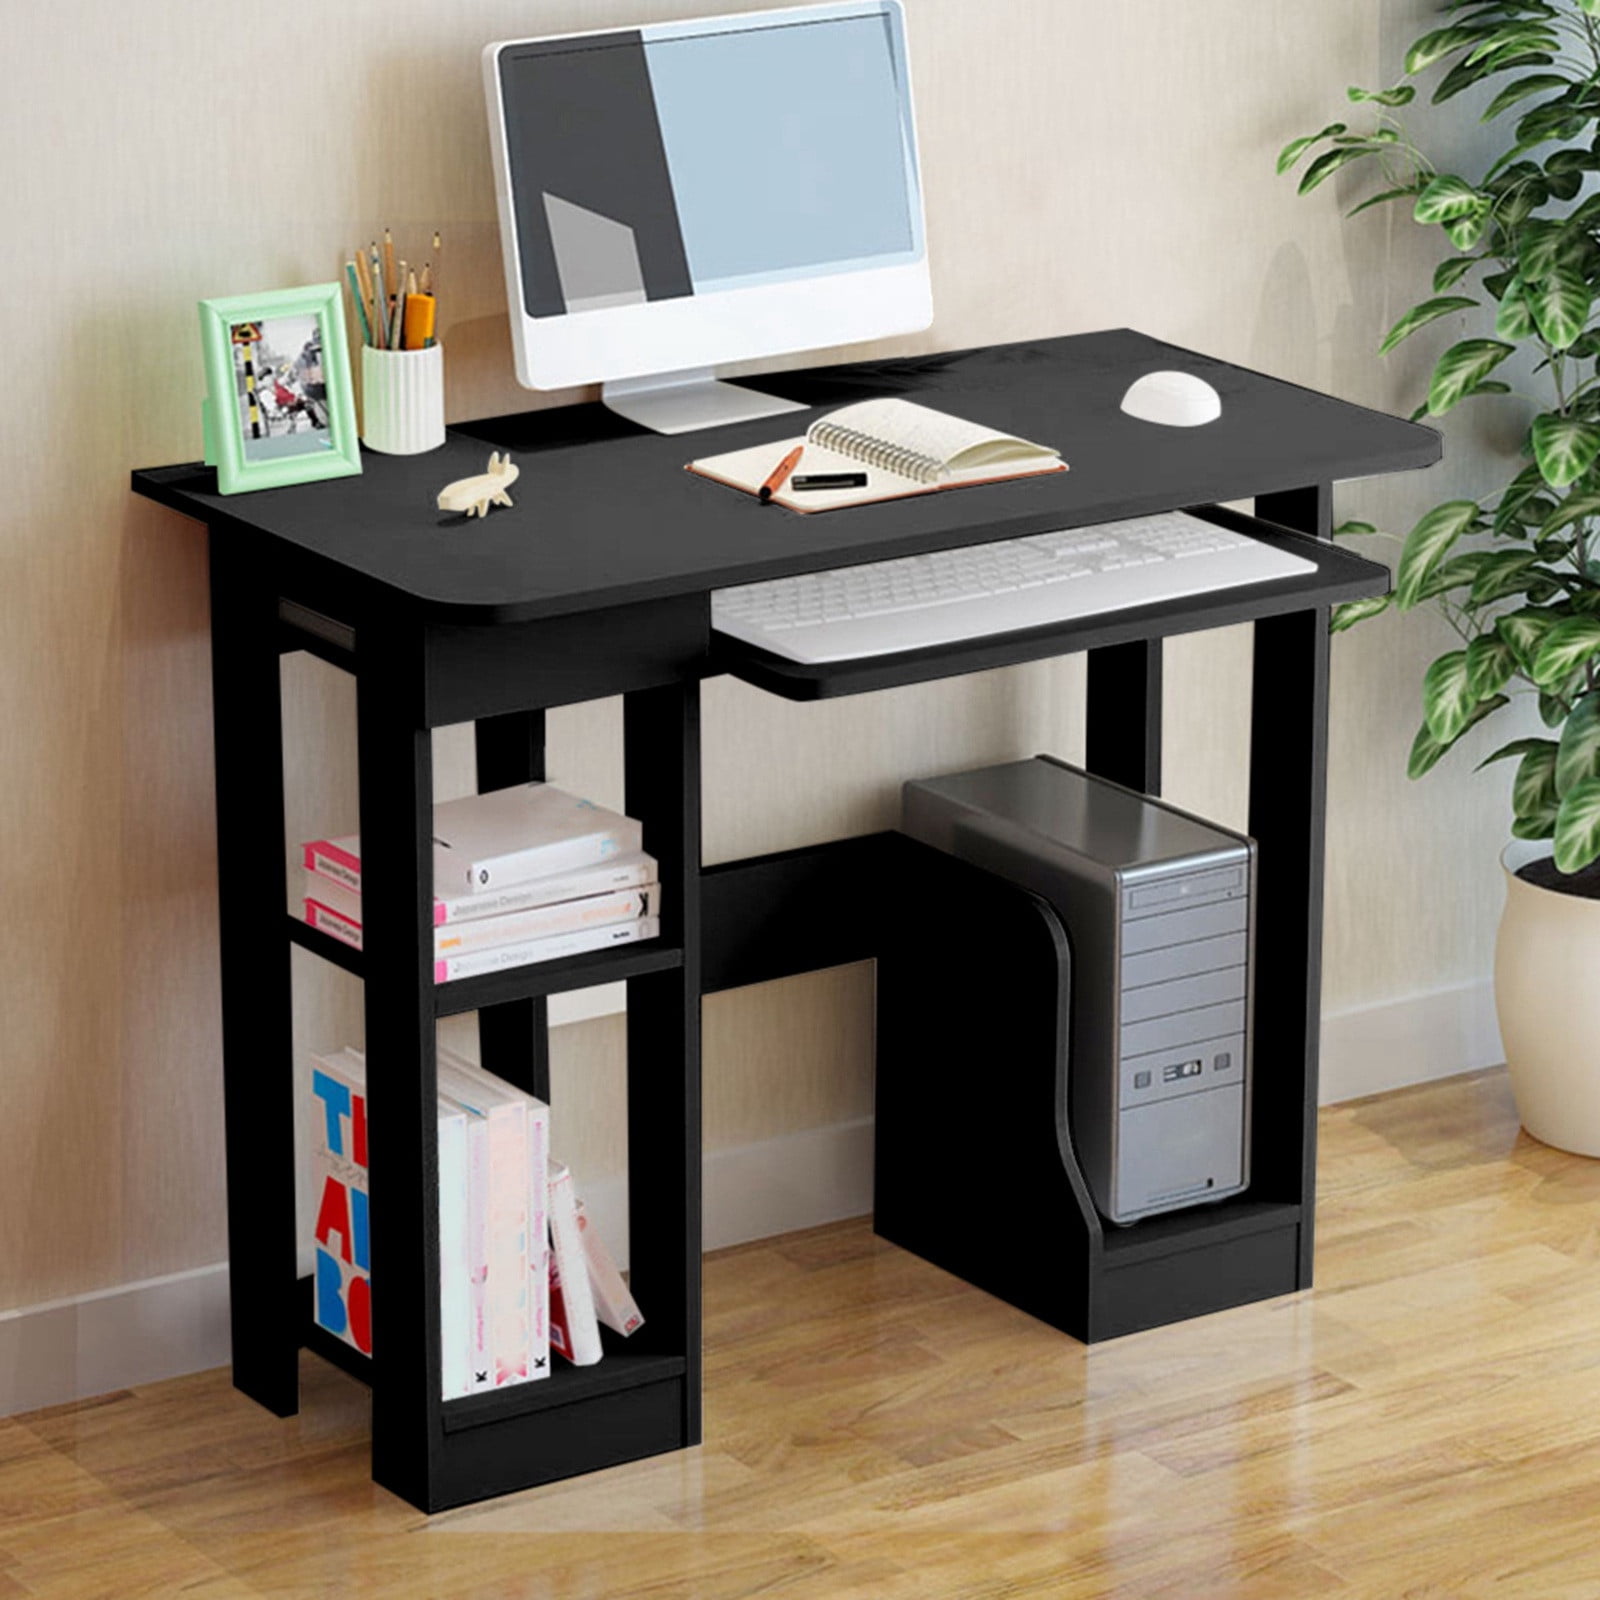 Details about   Home Office Computer Desk With Storage Shelves W/ CPU Stand Study Writing Table 